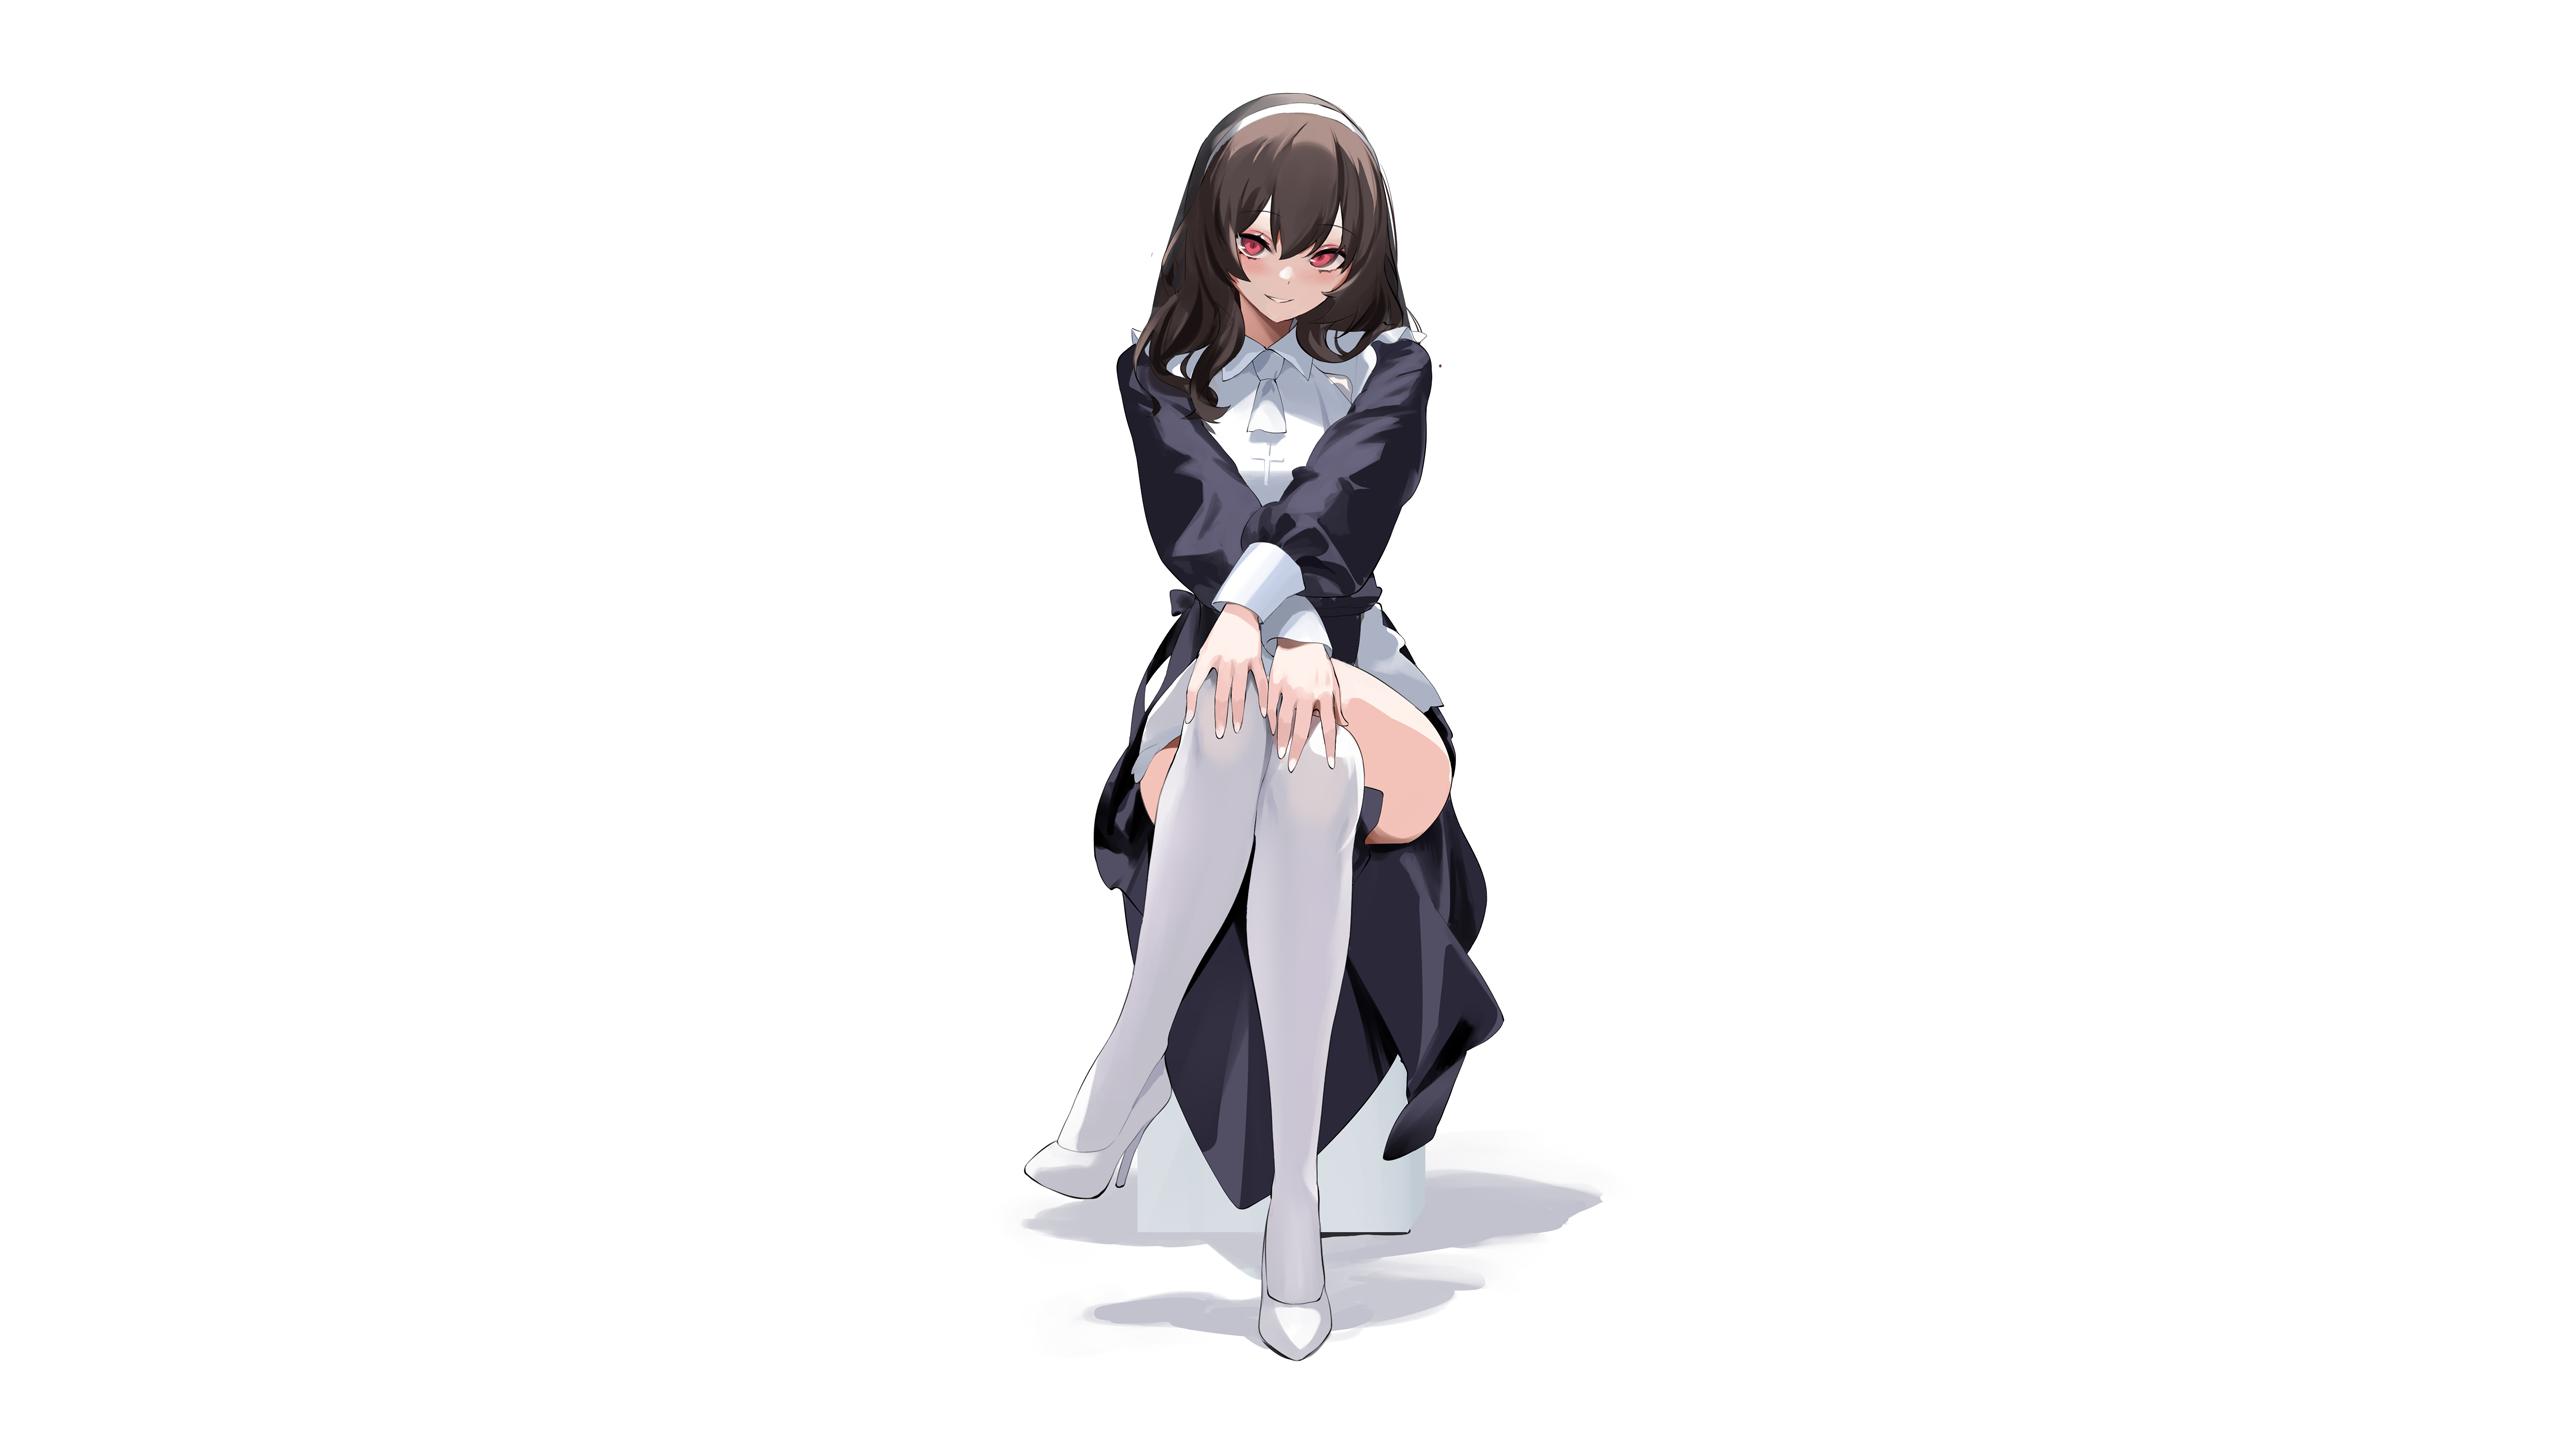 Anime 2560x1440 anime anime girls simple background sitting maid maid outfit thighs stockings white stockings white legwear Spider Apple white background frontal view